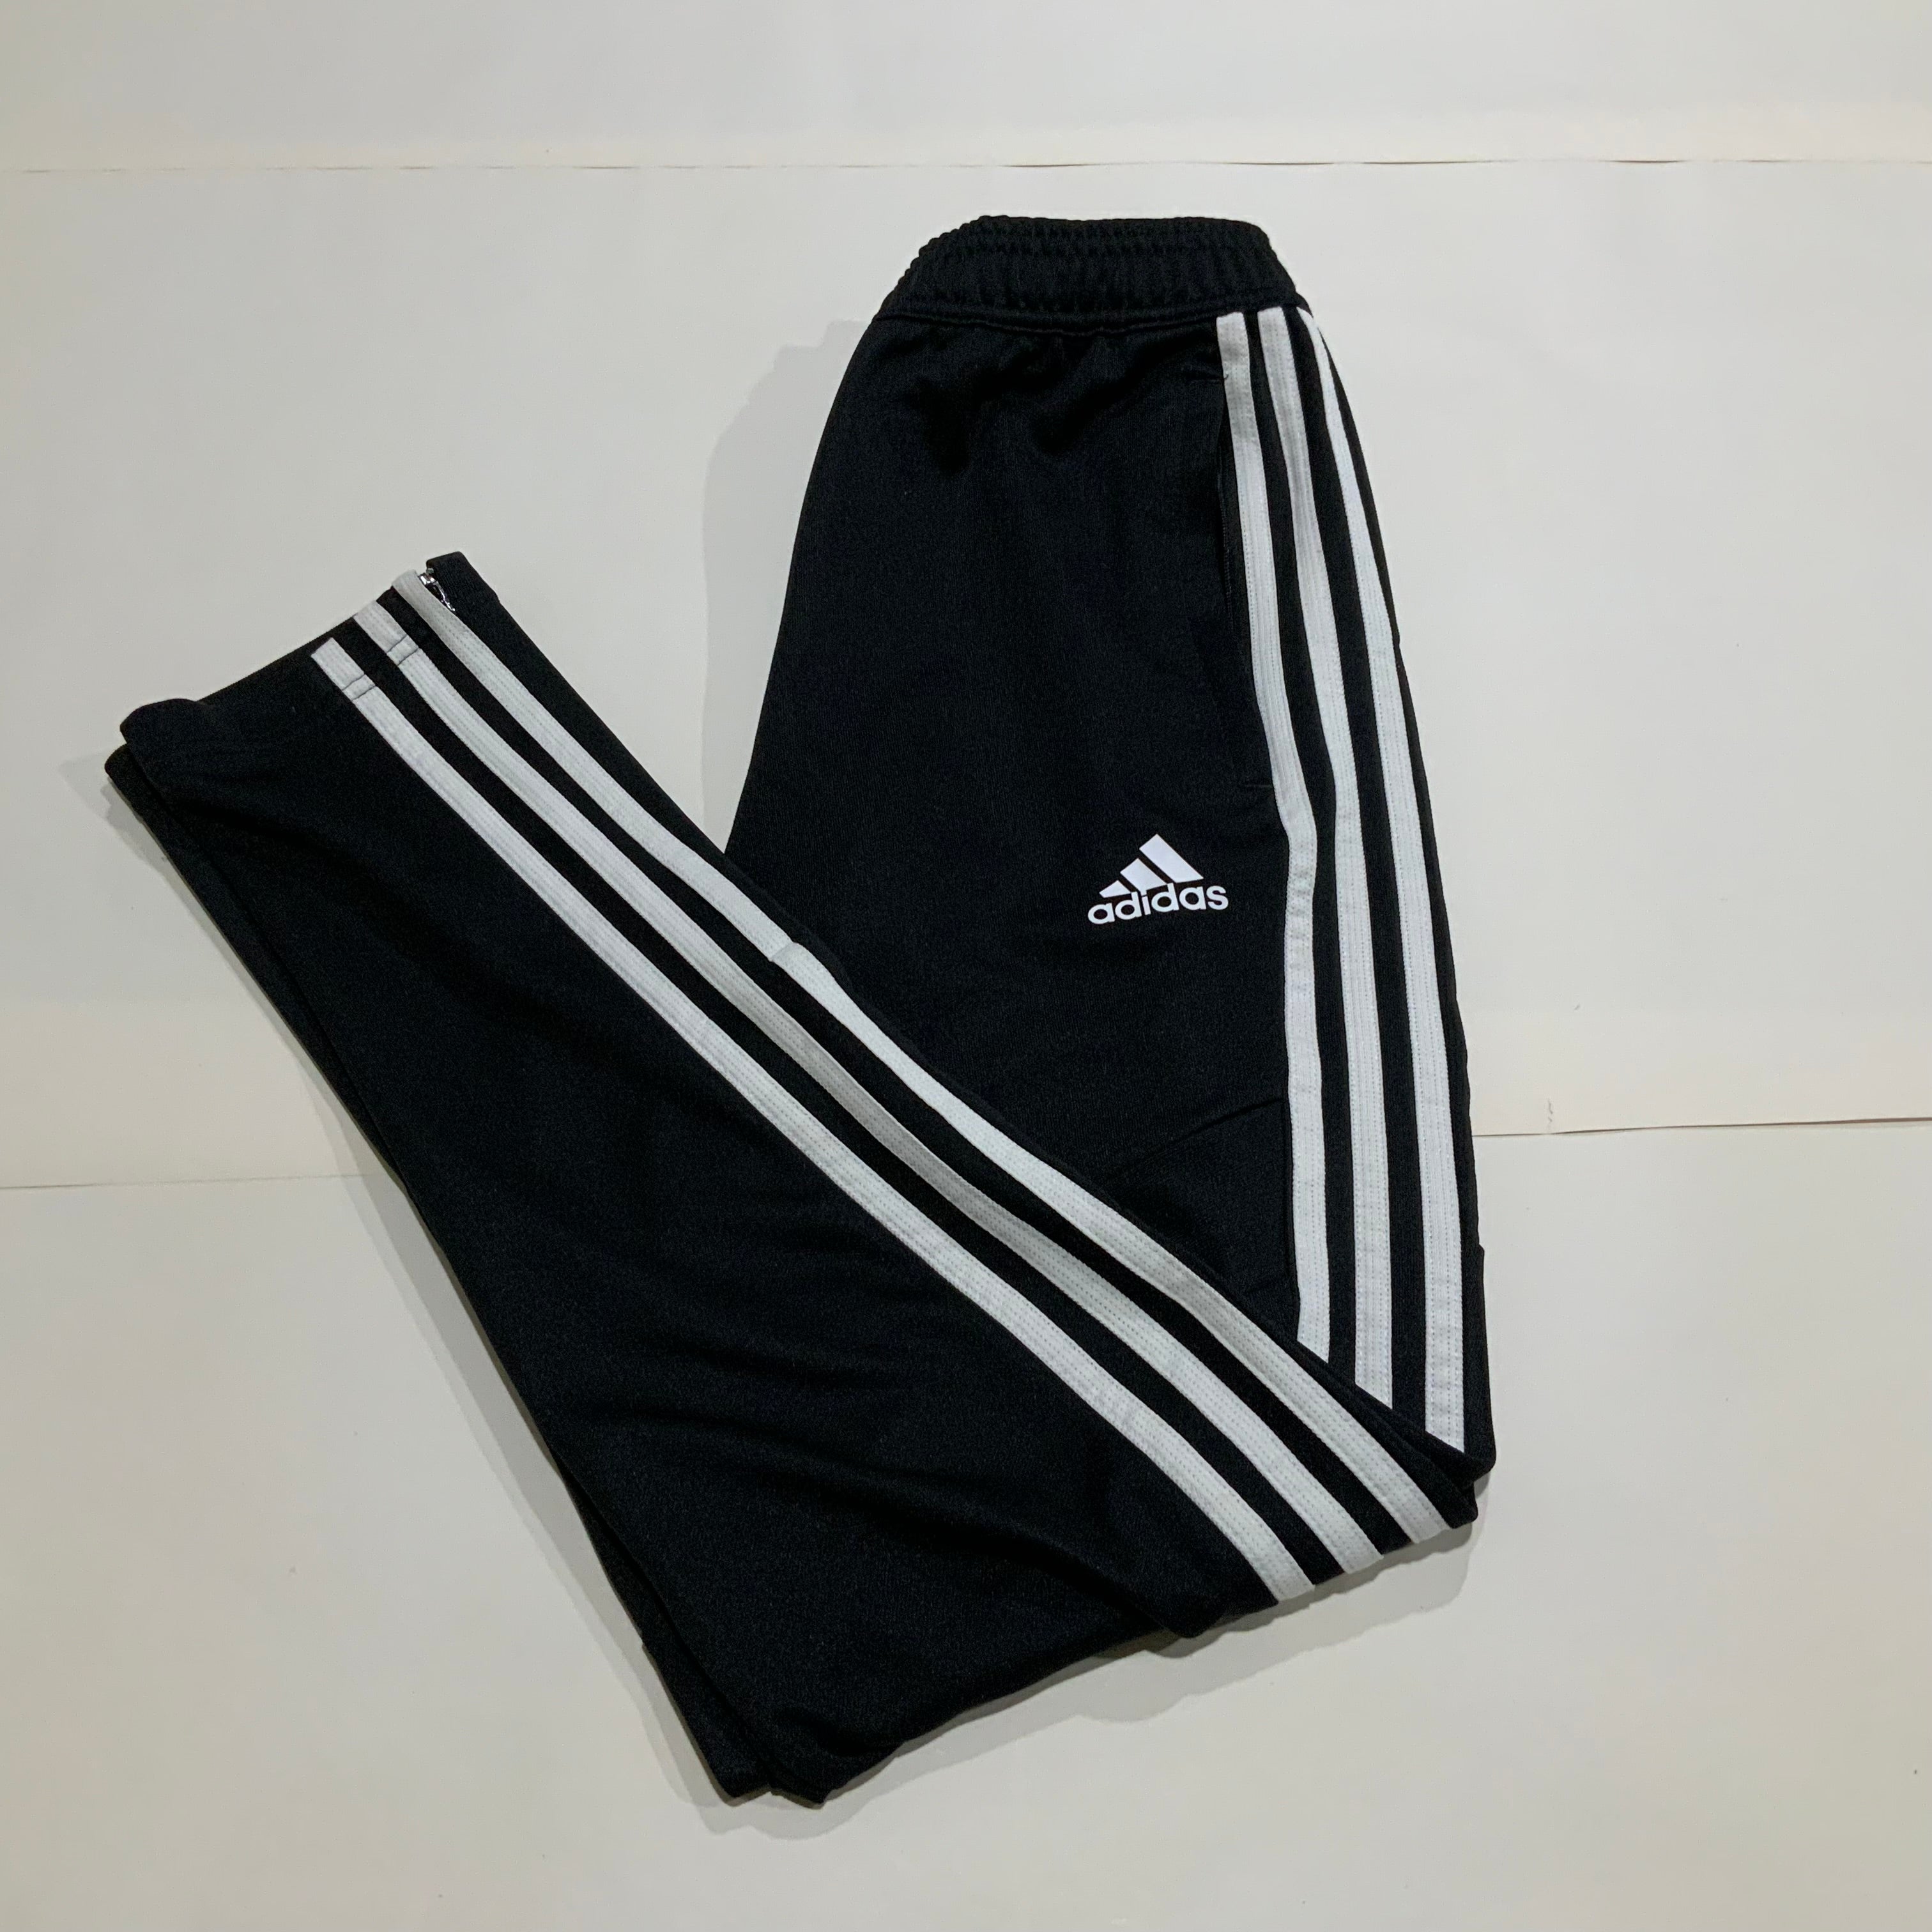 XXL | Adidas | Jogging bottoms | Mens sports clothing | Sports & leisure |  www.very.co.uk